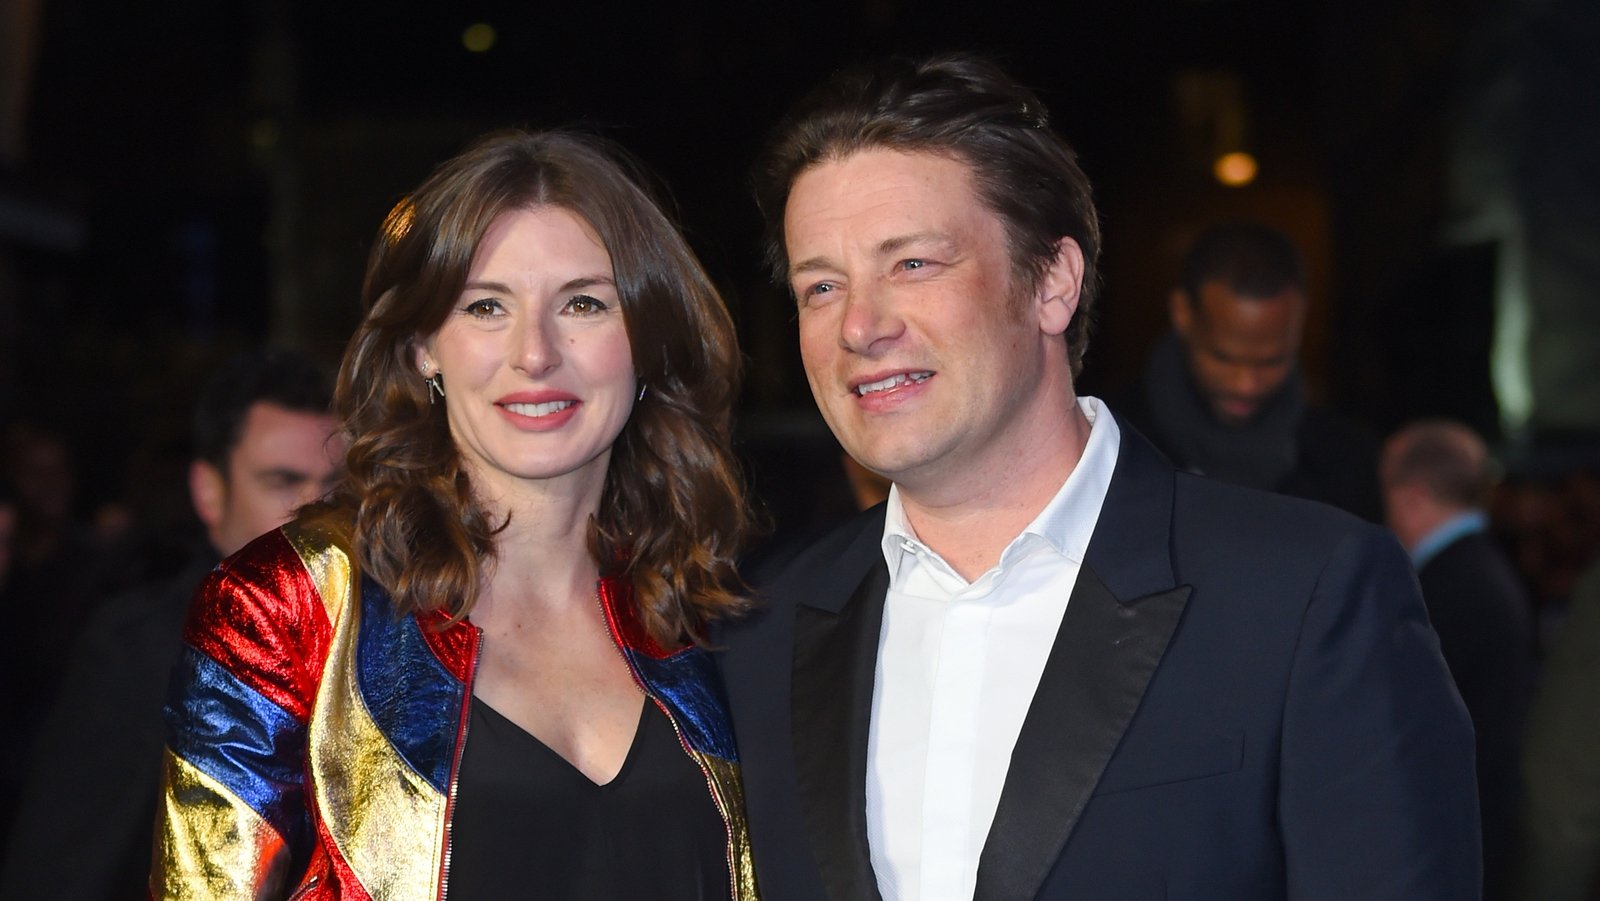 Jamie Oliver's wife Jools miscarried during lockdown